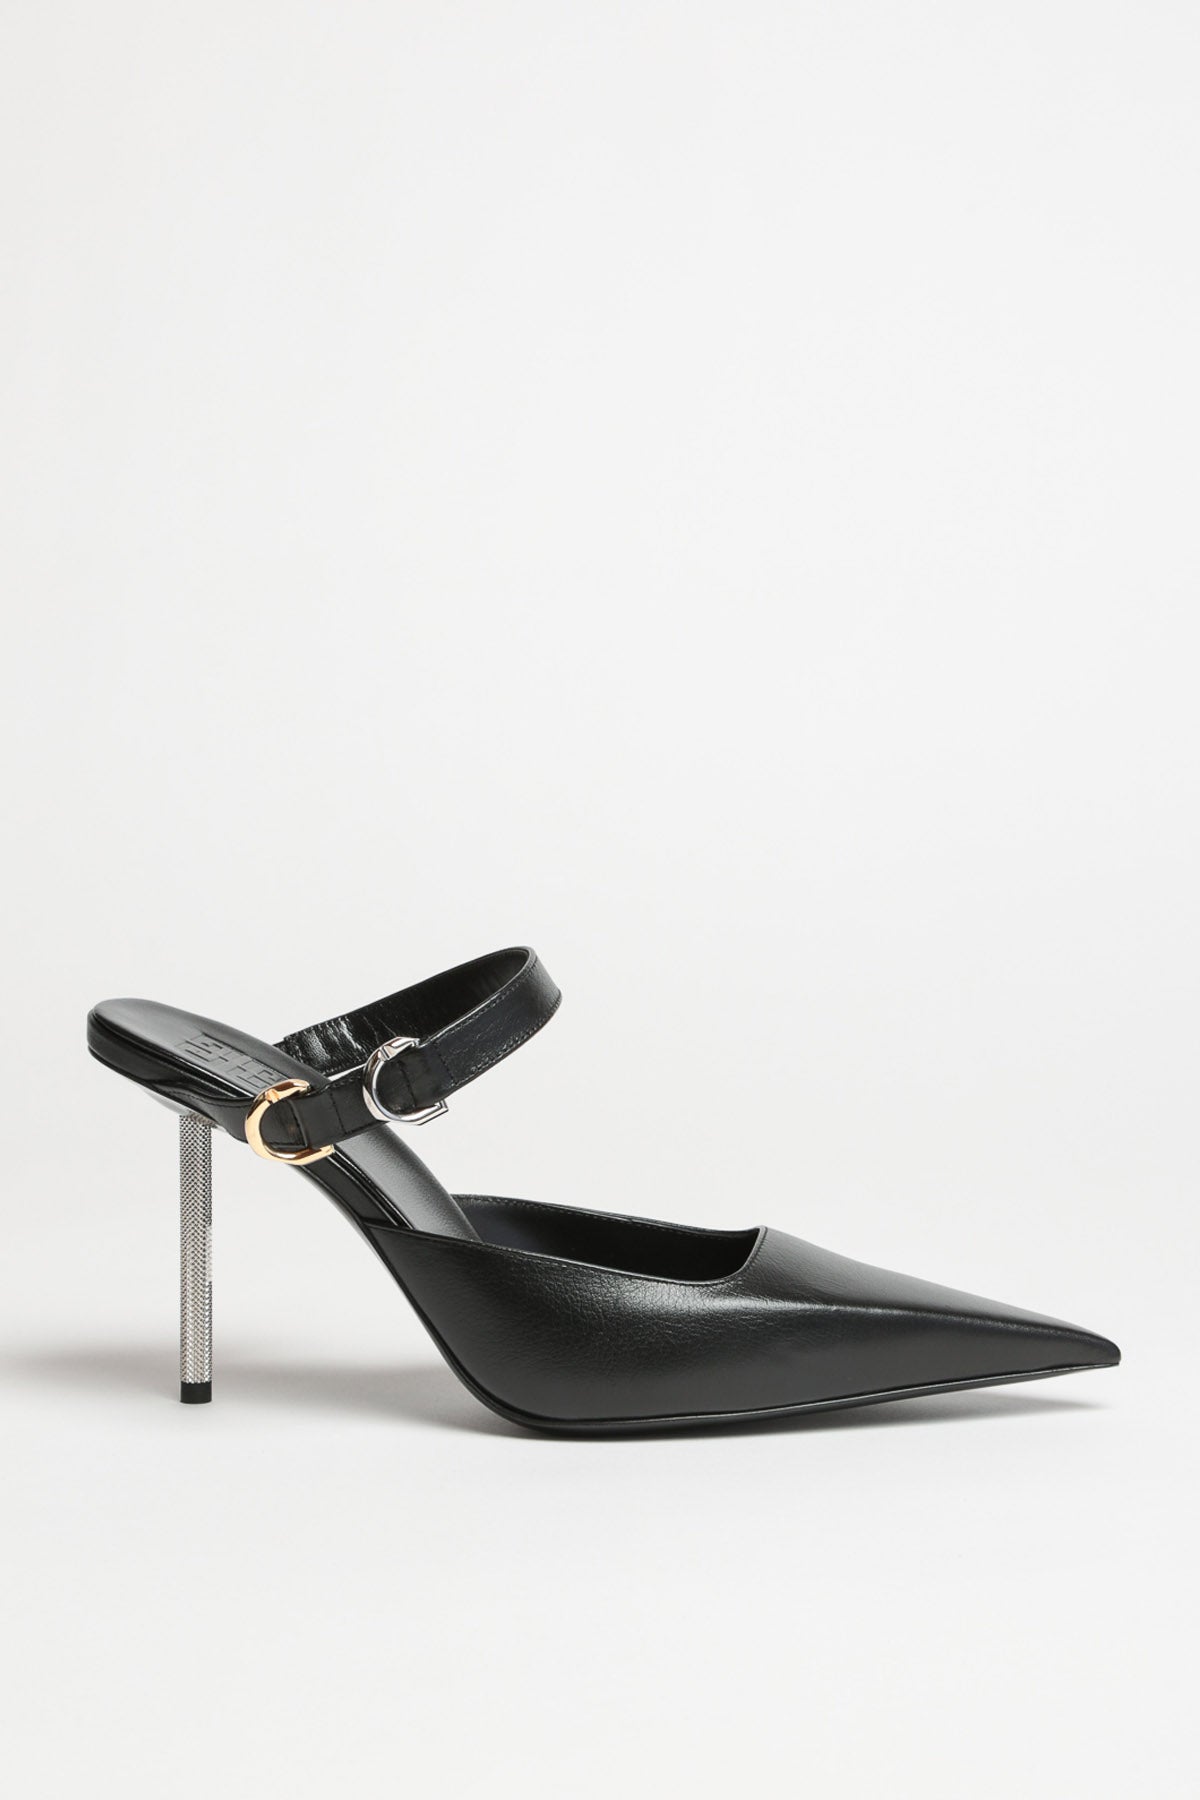 GIVENCHY | VOYOU HIGH MULES 90 – MAXFIELD LA